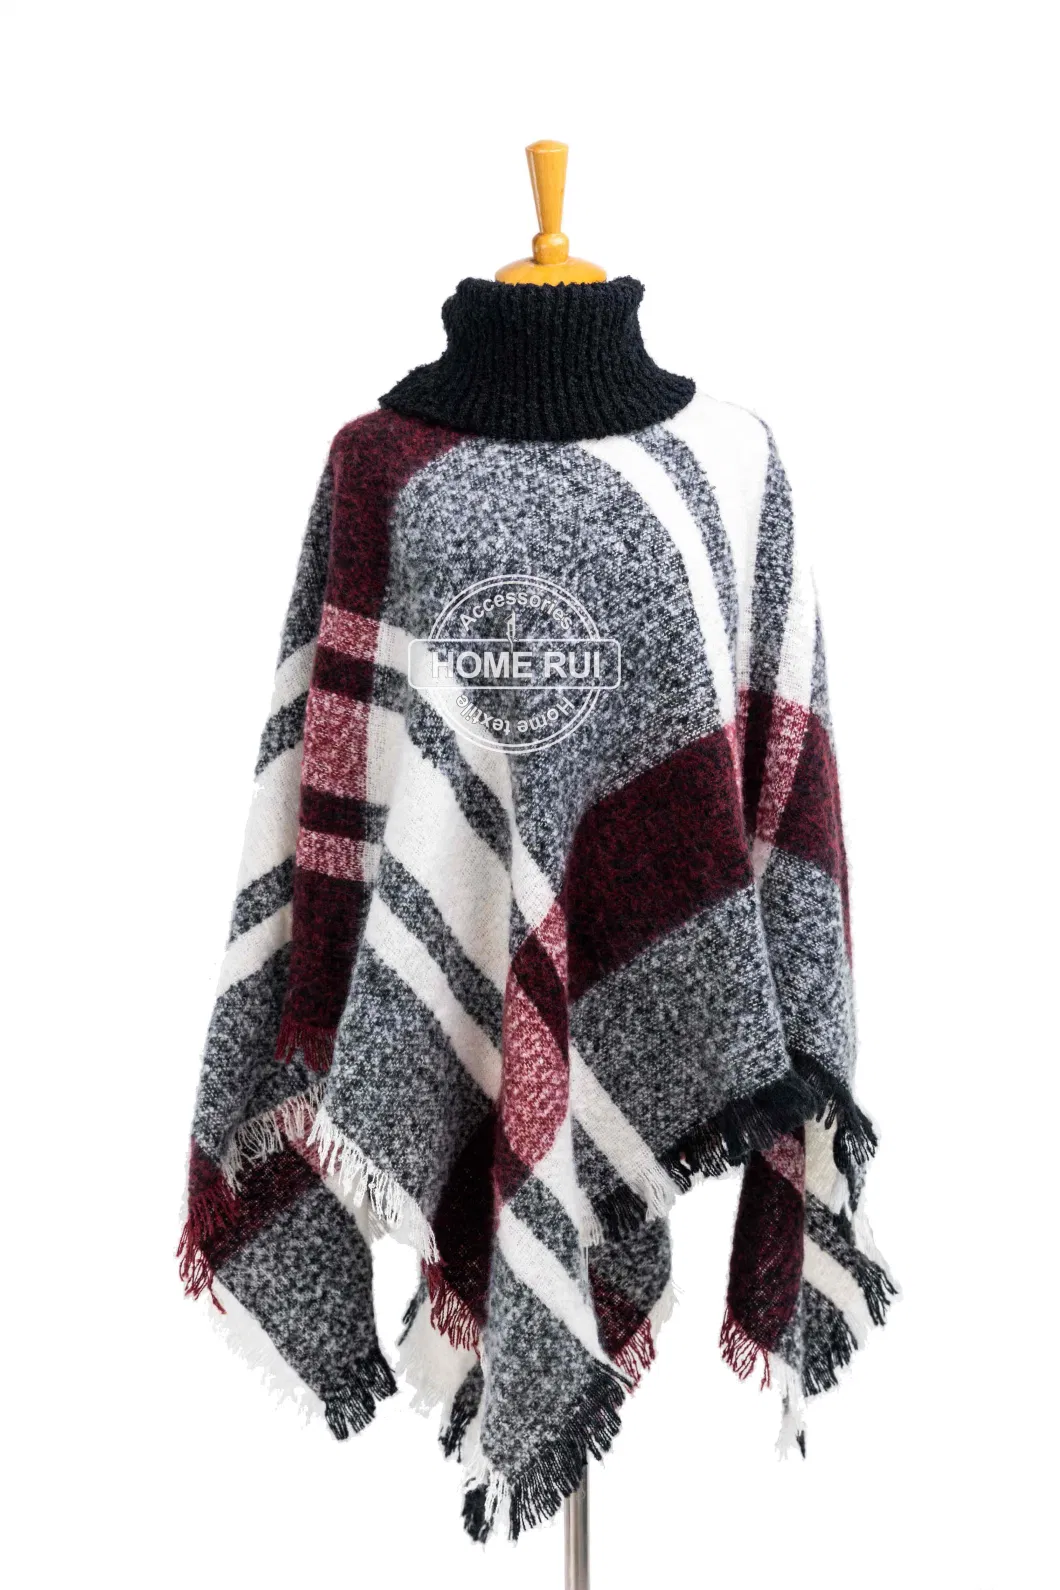 Spring Autumn Woman Lady Warm Fashion Woven Polyester Boucle Yarn Brushed Black Mixed Colour Fringe Pullover Wraps Grids Plaid Checks Shawl Turtleneck Poncho